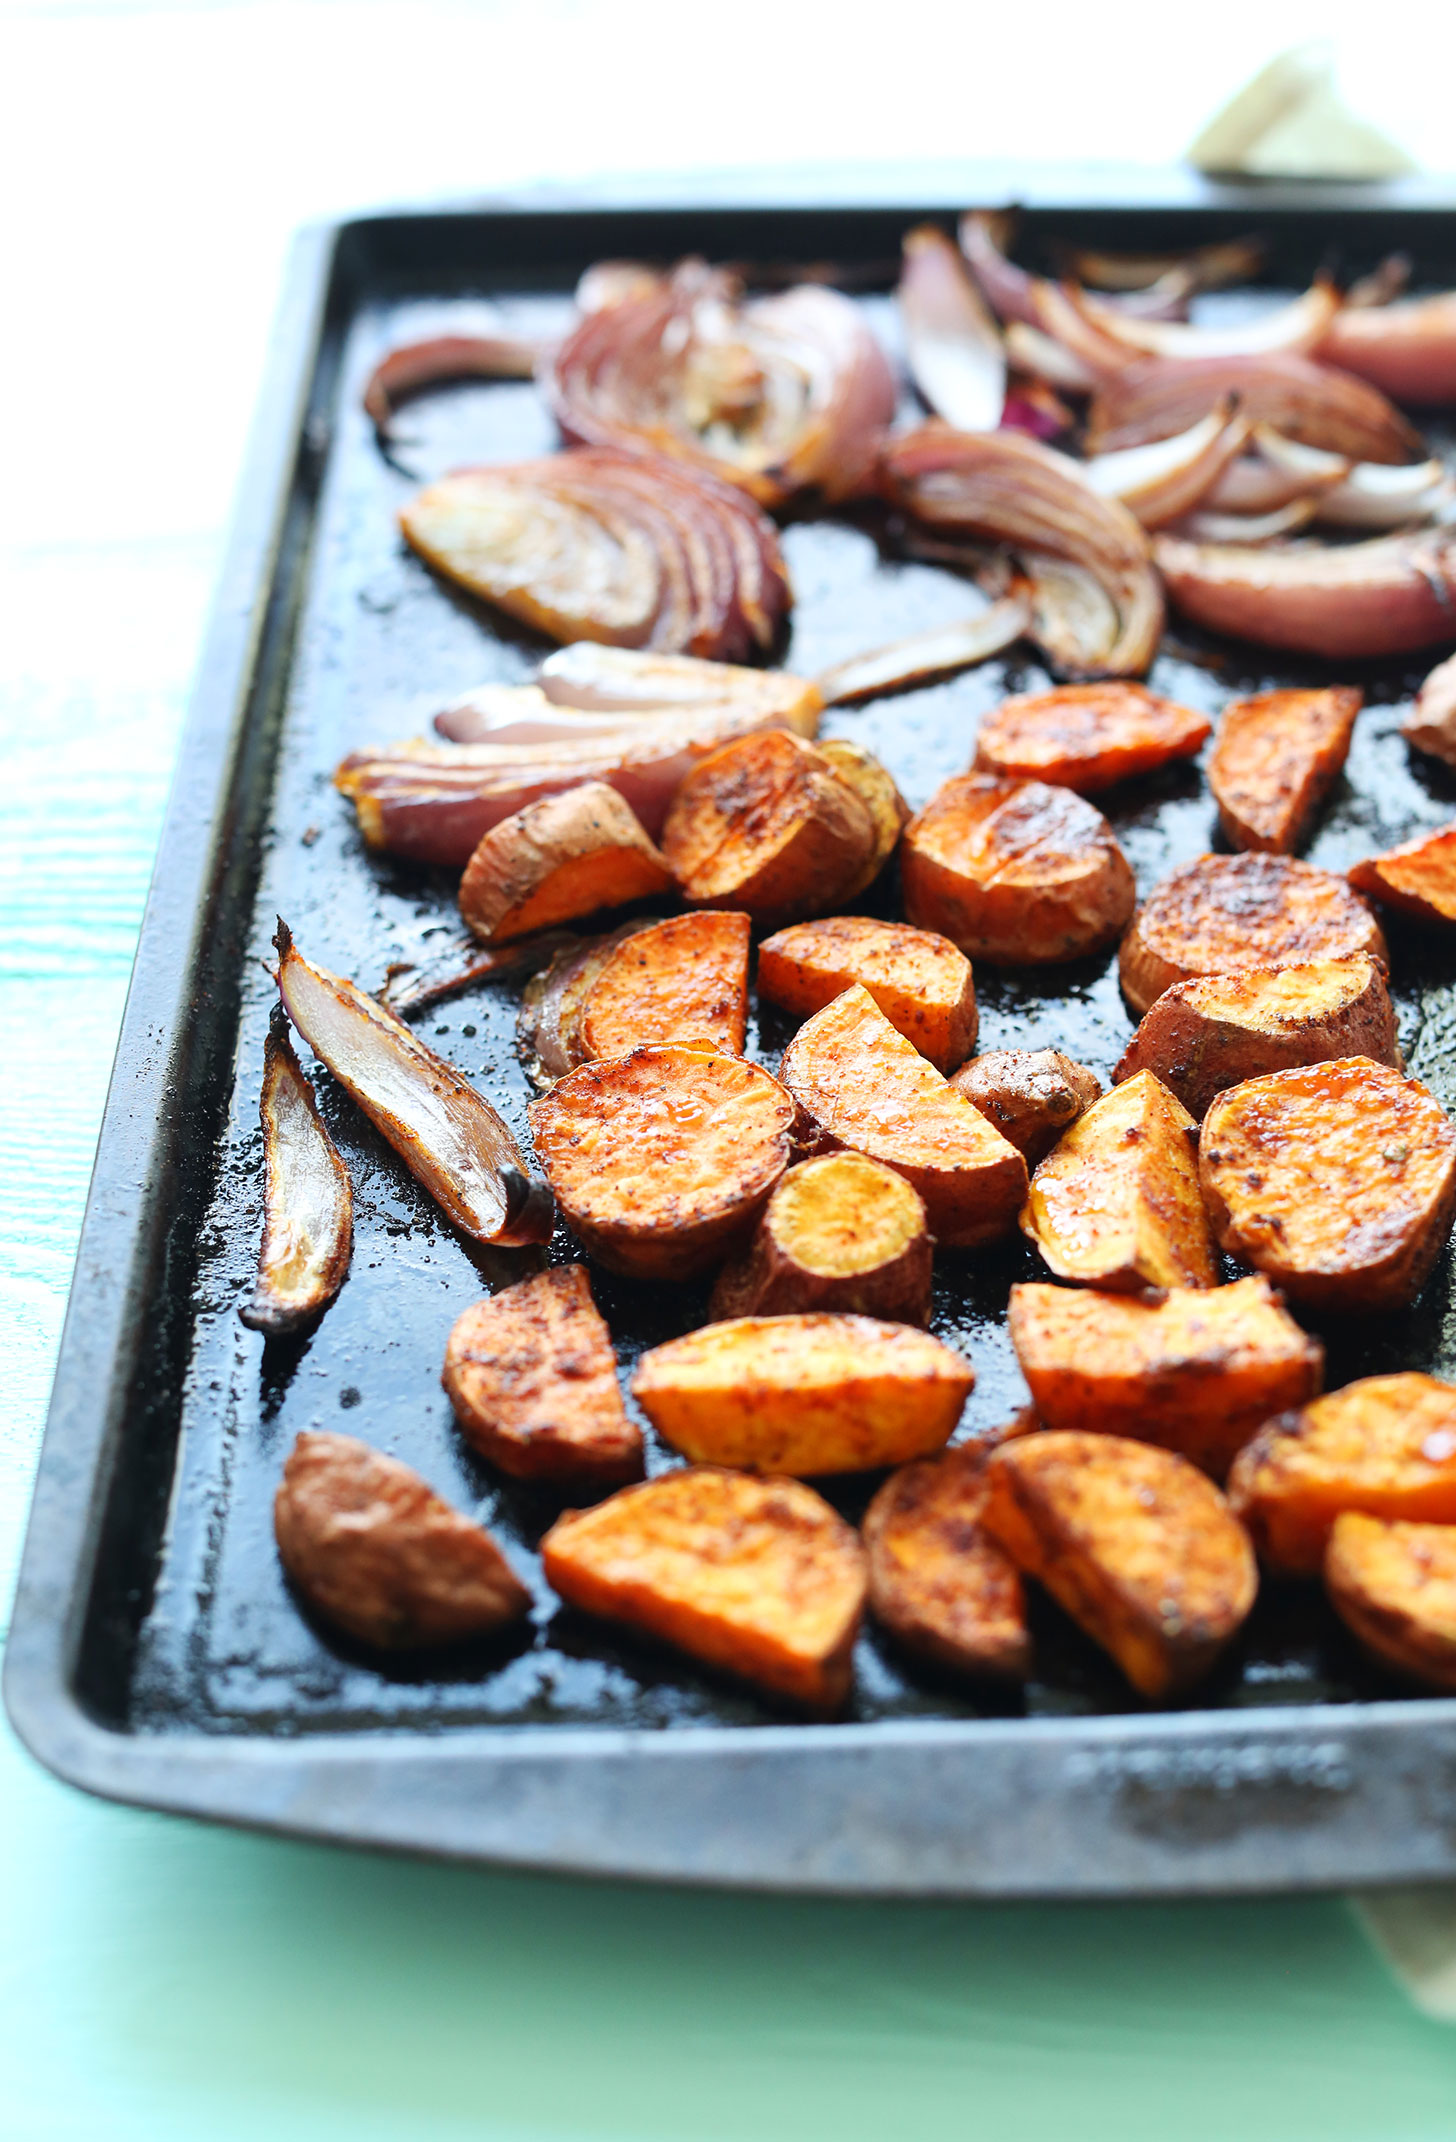 Baking sheet with roasted red onion and sweet potatoes for making a healthy tofu breakfast scramble